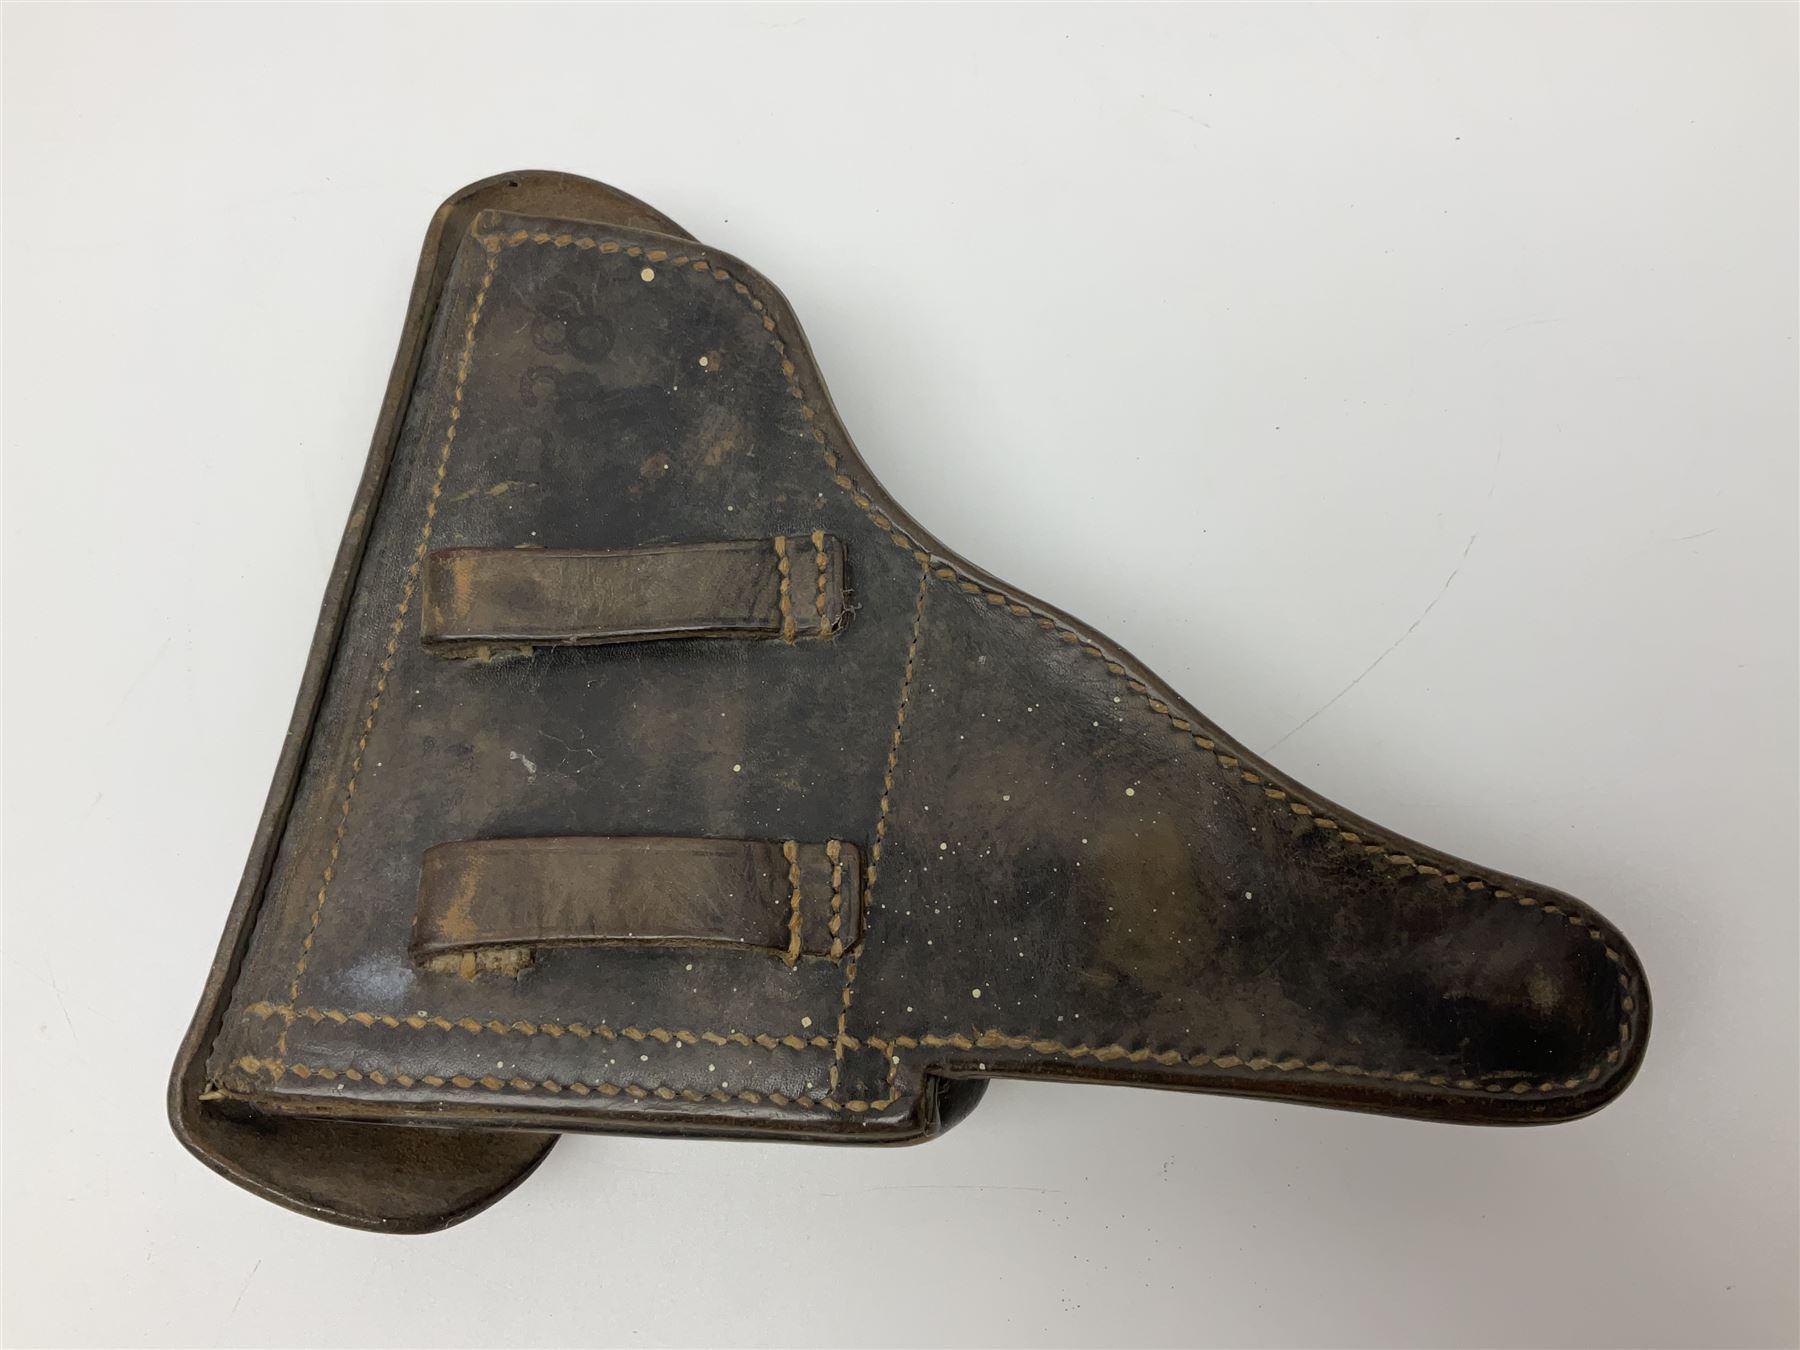 WWII German brown leather holster with side magazine pouch for a Walther P.38 semi-automatic pistol - Image 13 of 16